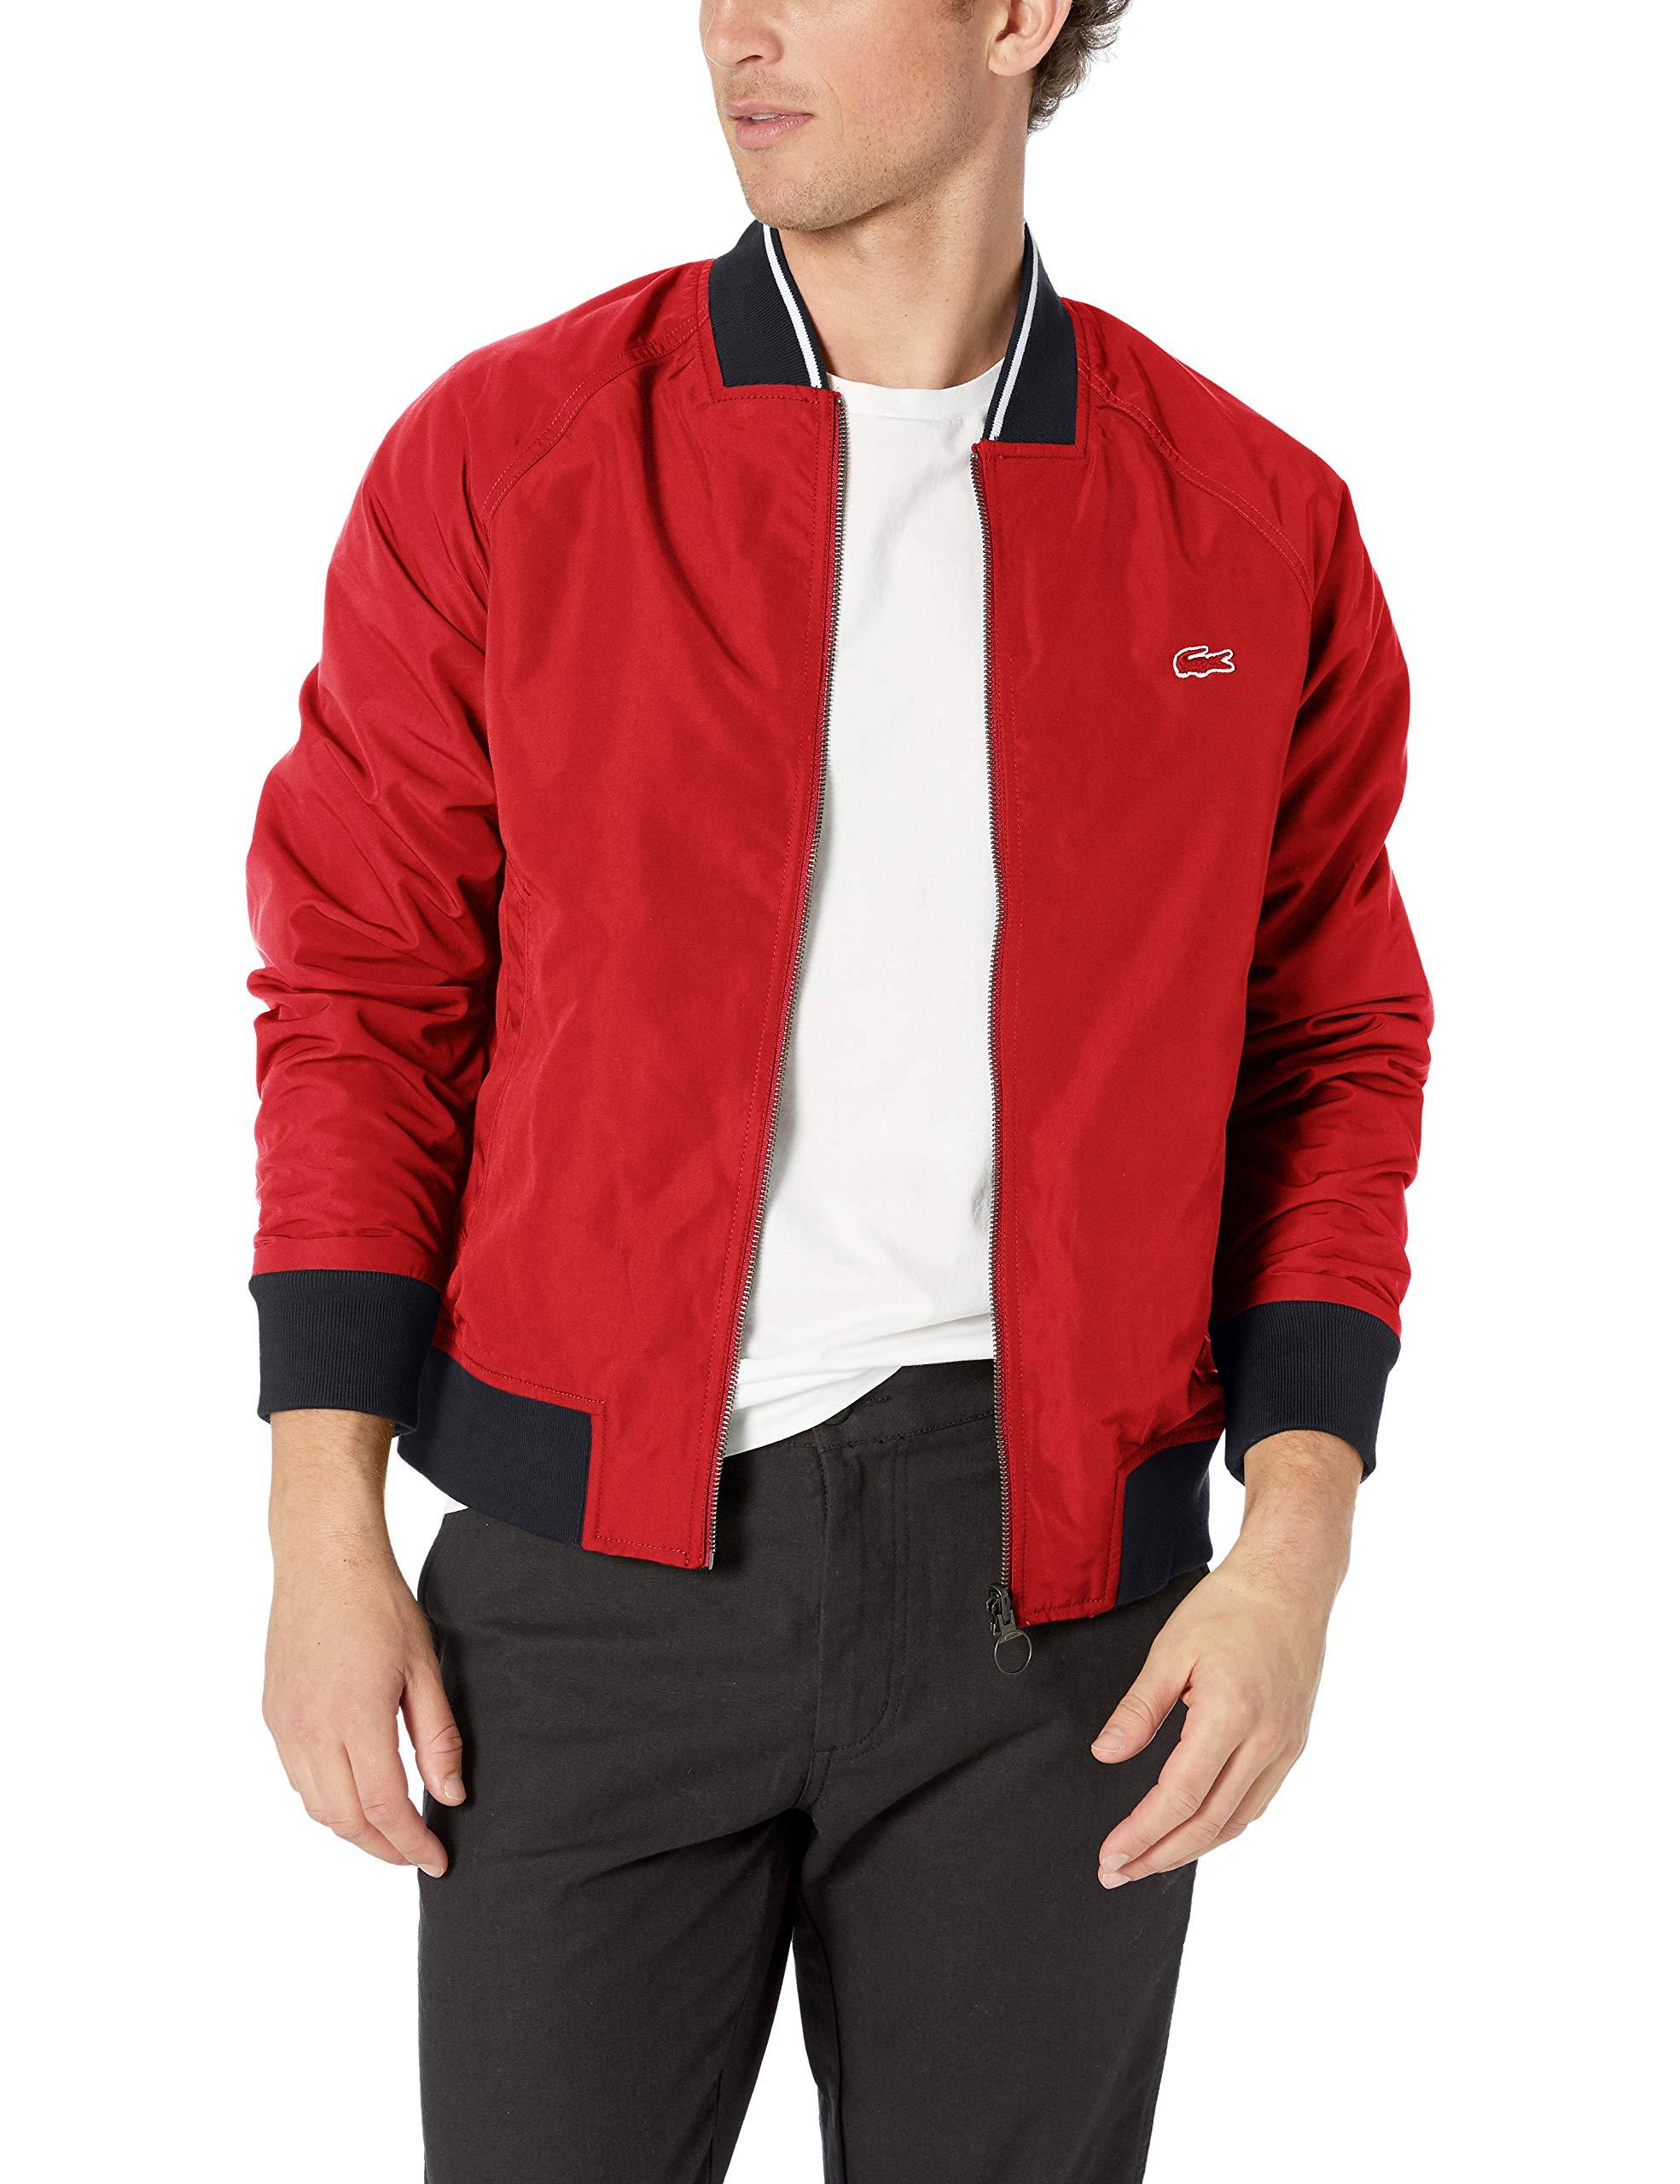 Lacoste Lightweight Bomber Reversible Twill Cotton in Red/Red/Navy Blue  (Red) for Men - Lyst